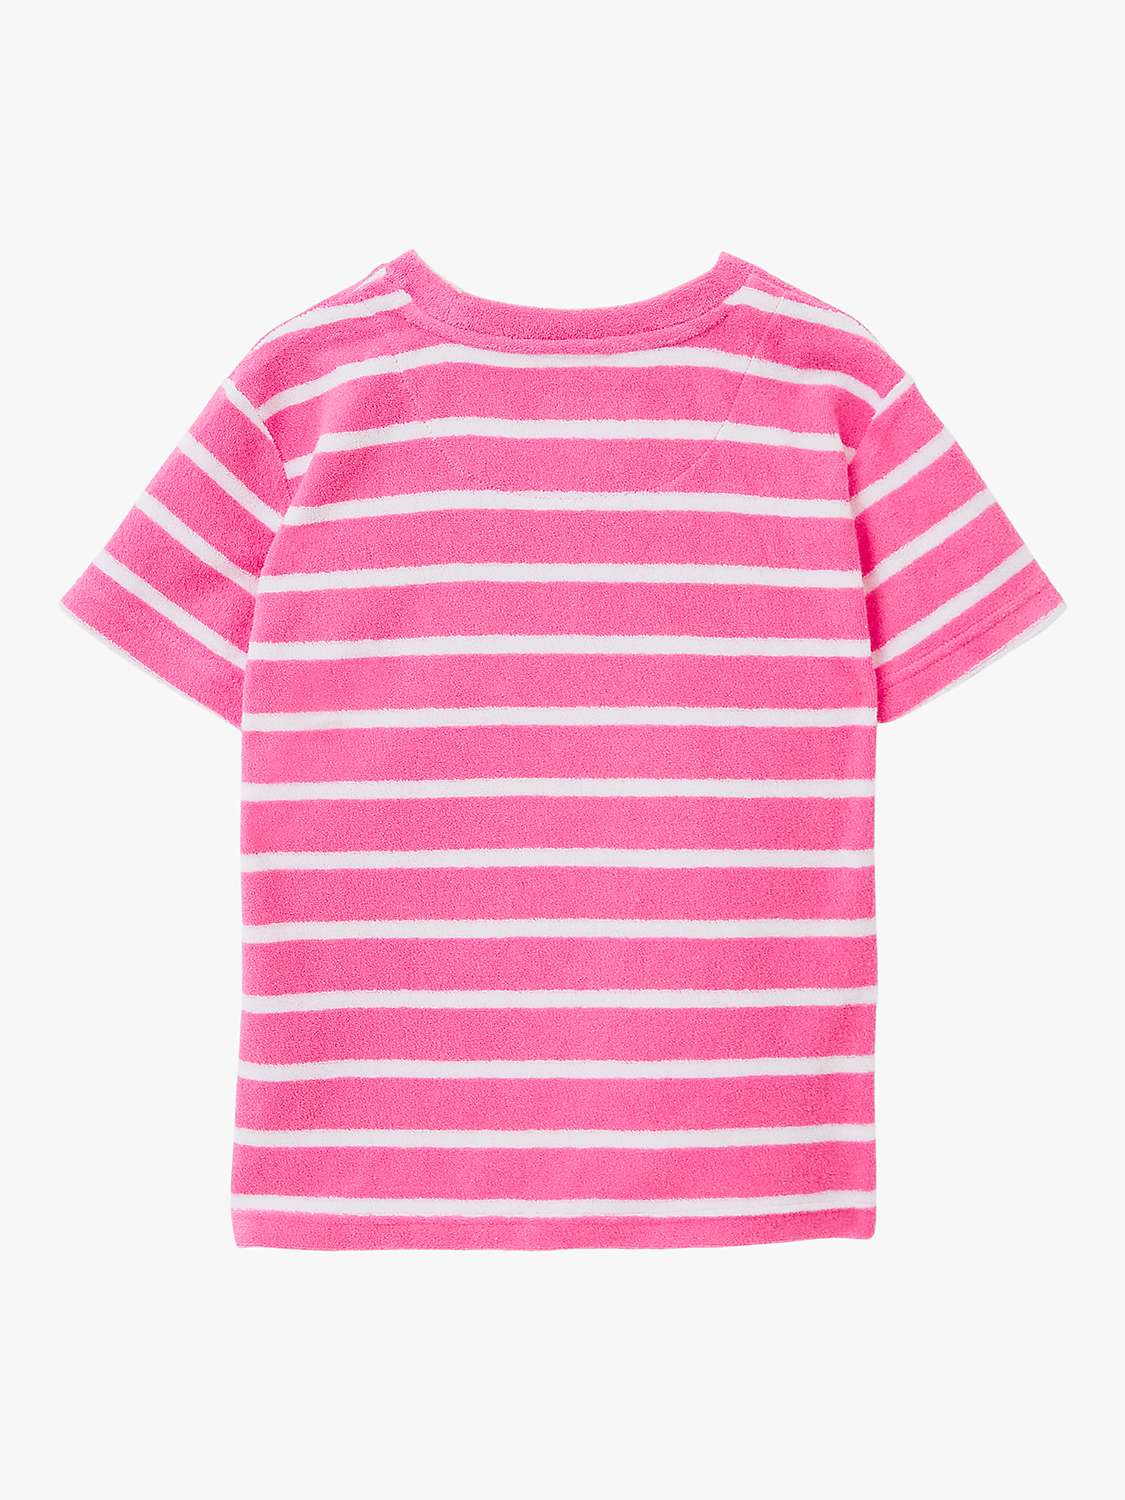 Buy Crew Clothing Kids' Stripe Oversized Dropped Shoulder Towelling T-Shirt, Bright Pink Online at johnlewis.com